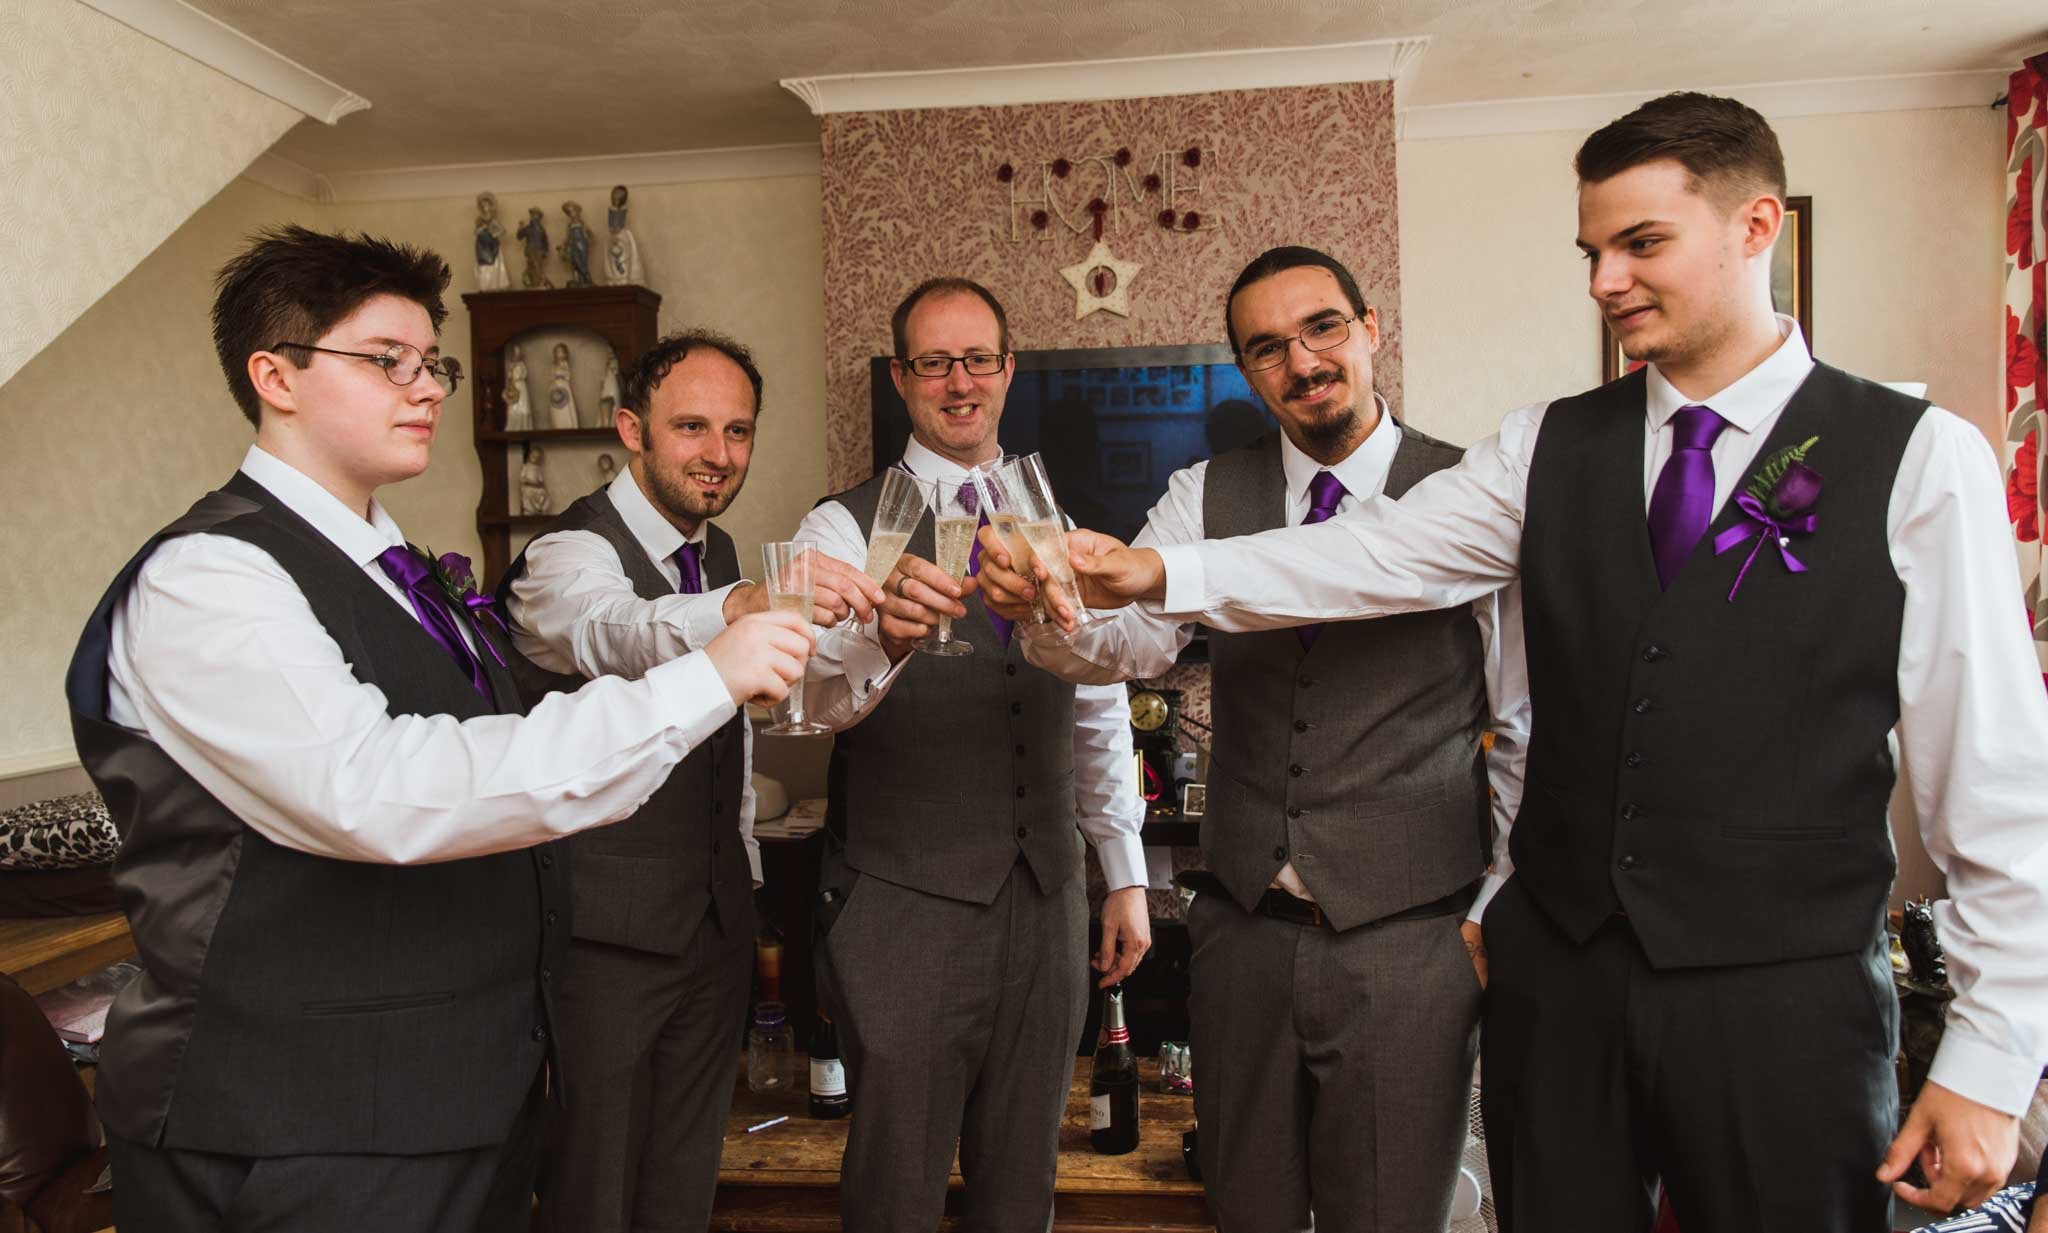  cheers with grooms family in their house  church green, holywood bt18 9dw  